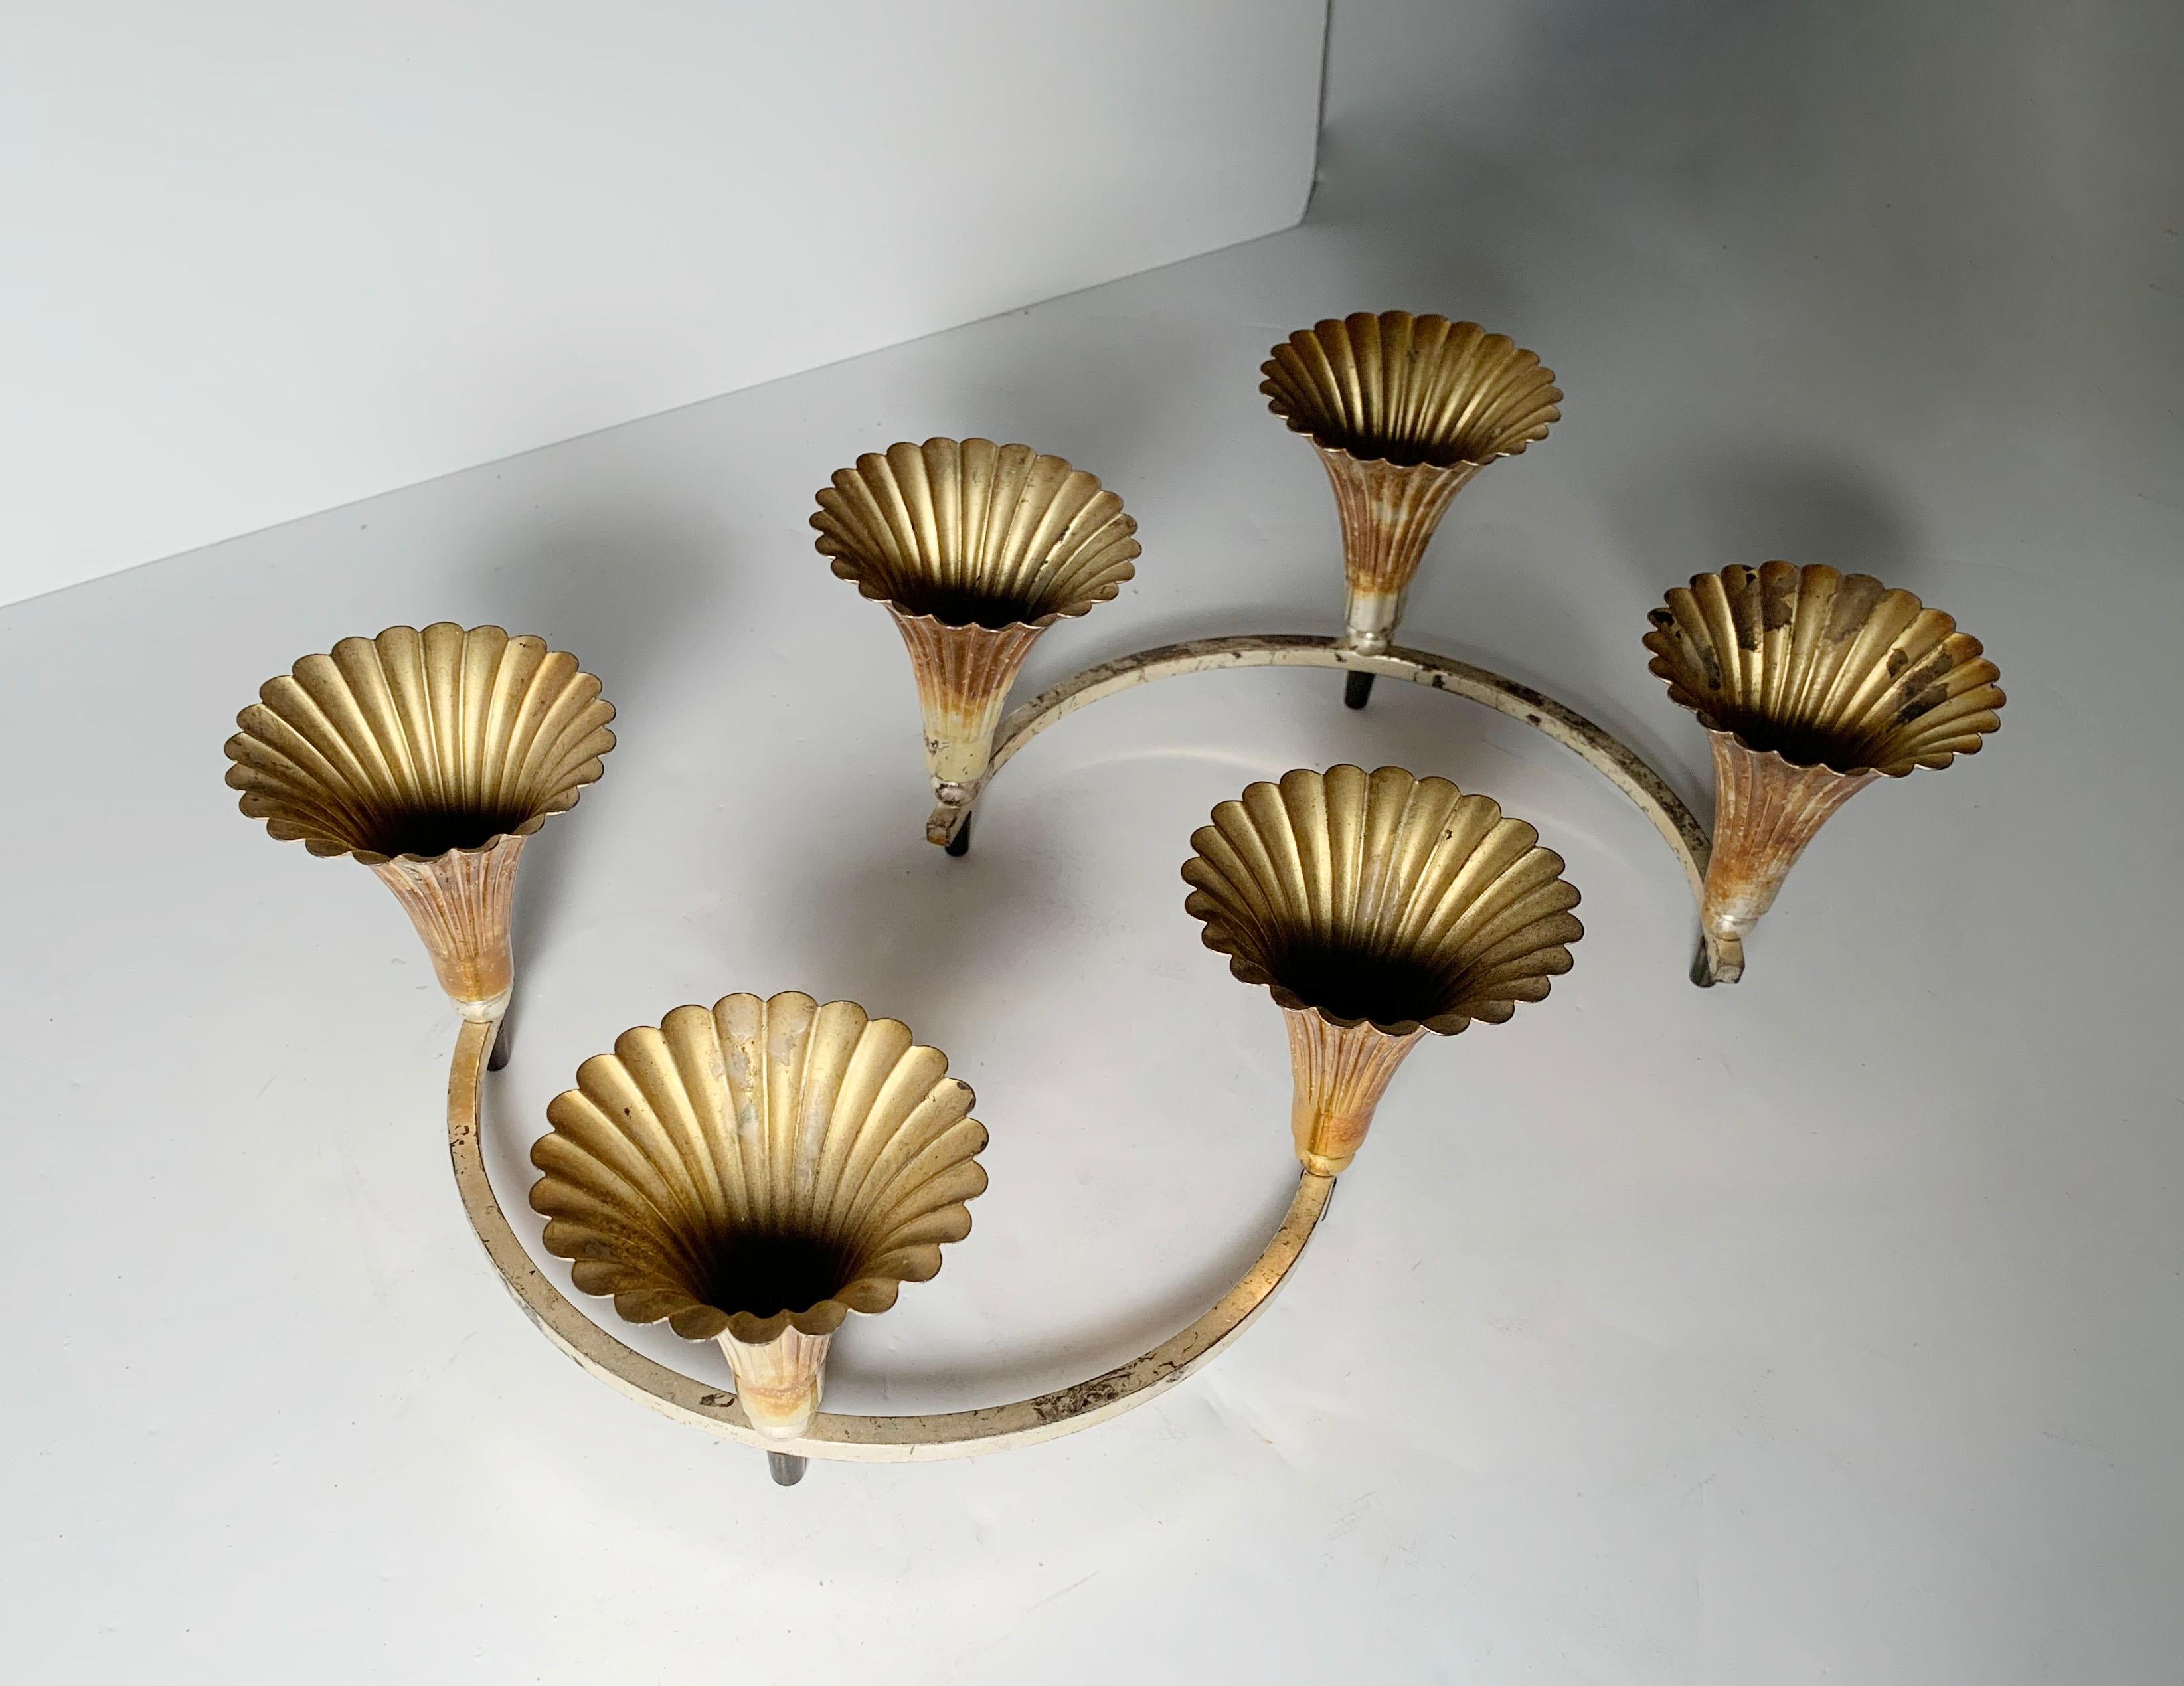 Vintage silver plate designer trumpet form and fluted candlestick holders by Sheffield. In the manner of Tommi Parzinger.

These can be arranged in many ways on a table (as shown in pics).

Marked Sheffield on underside.

